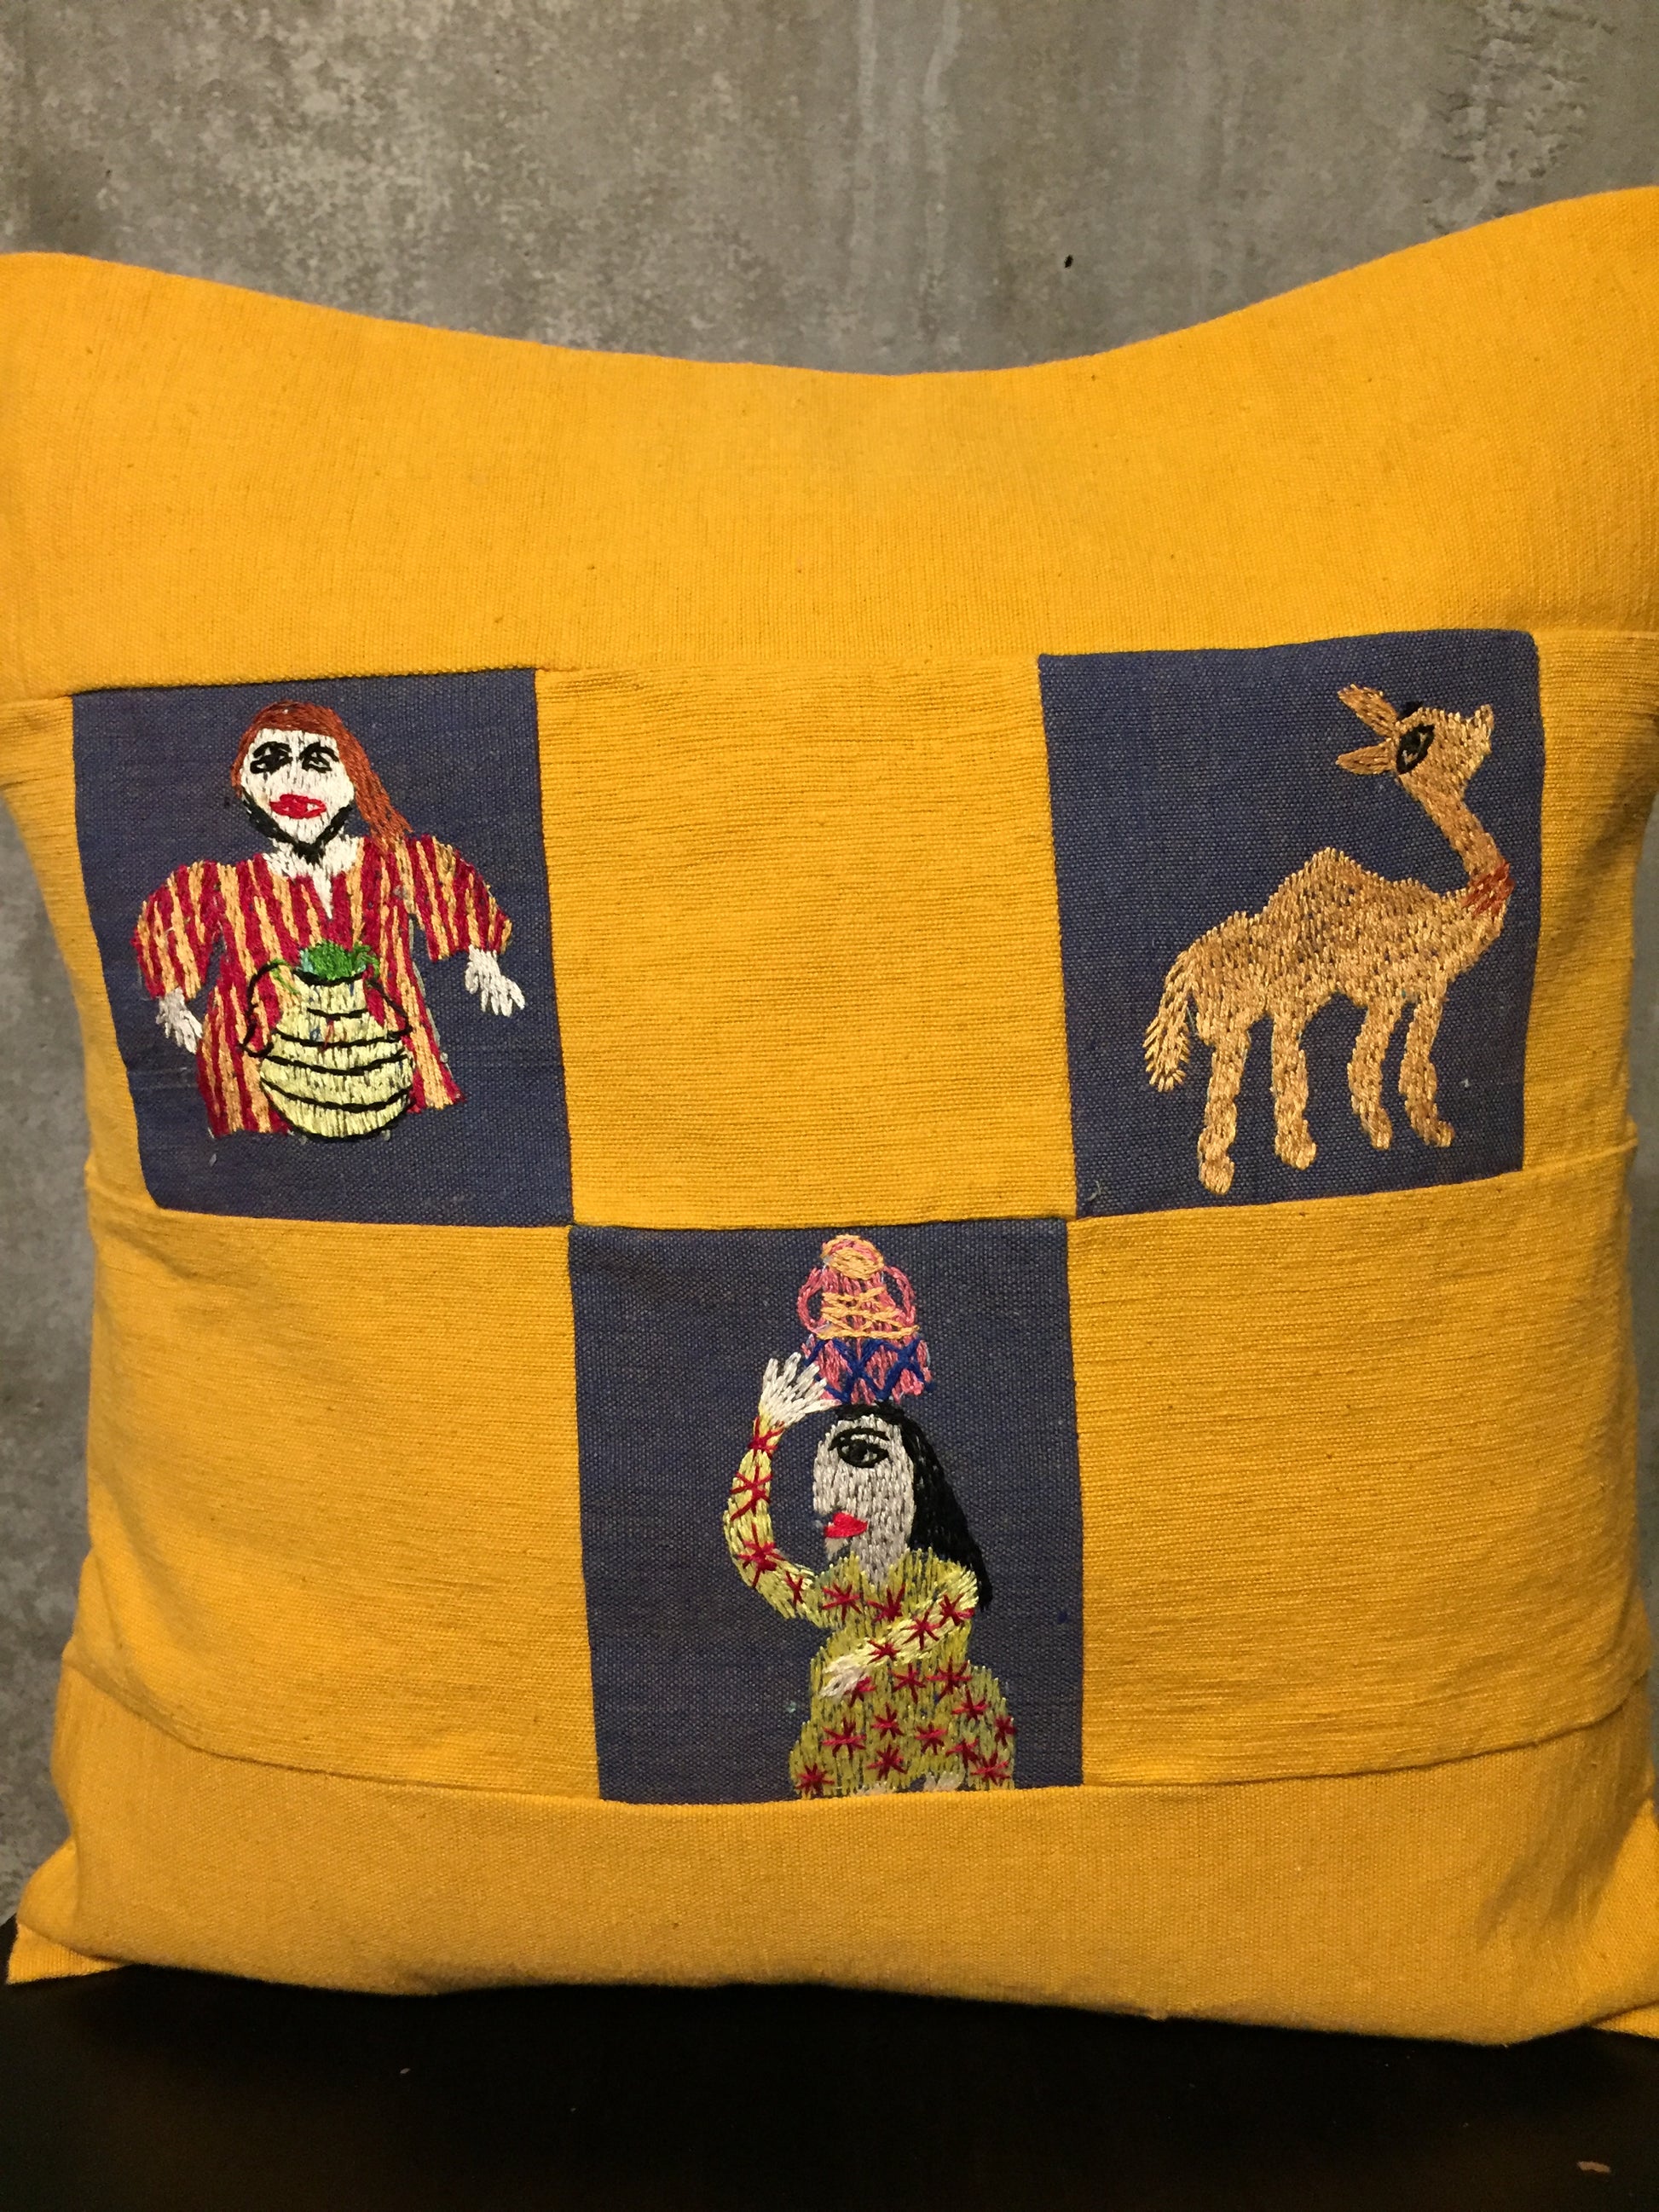 Handwoven Egyptian Cotton Cushion Cover - Hand Embroidered Art - Rural Scenes